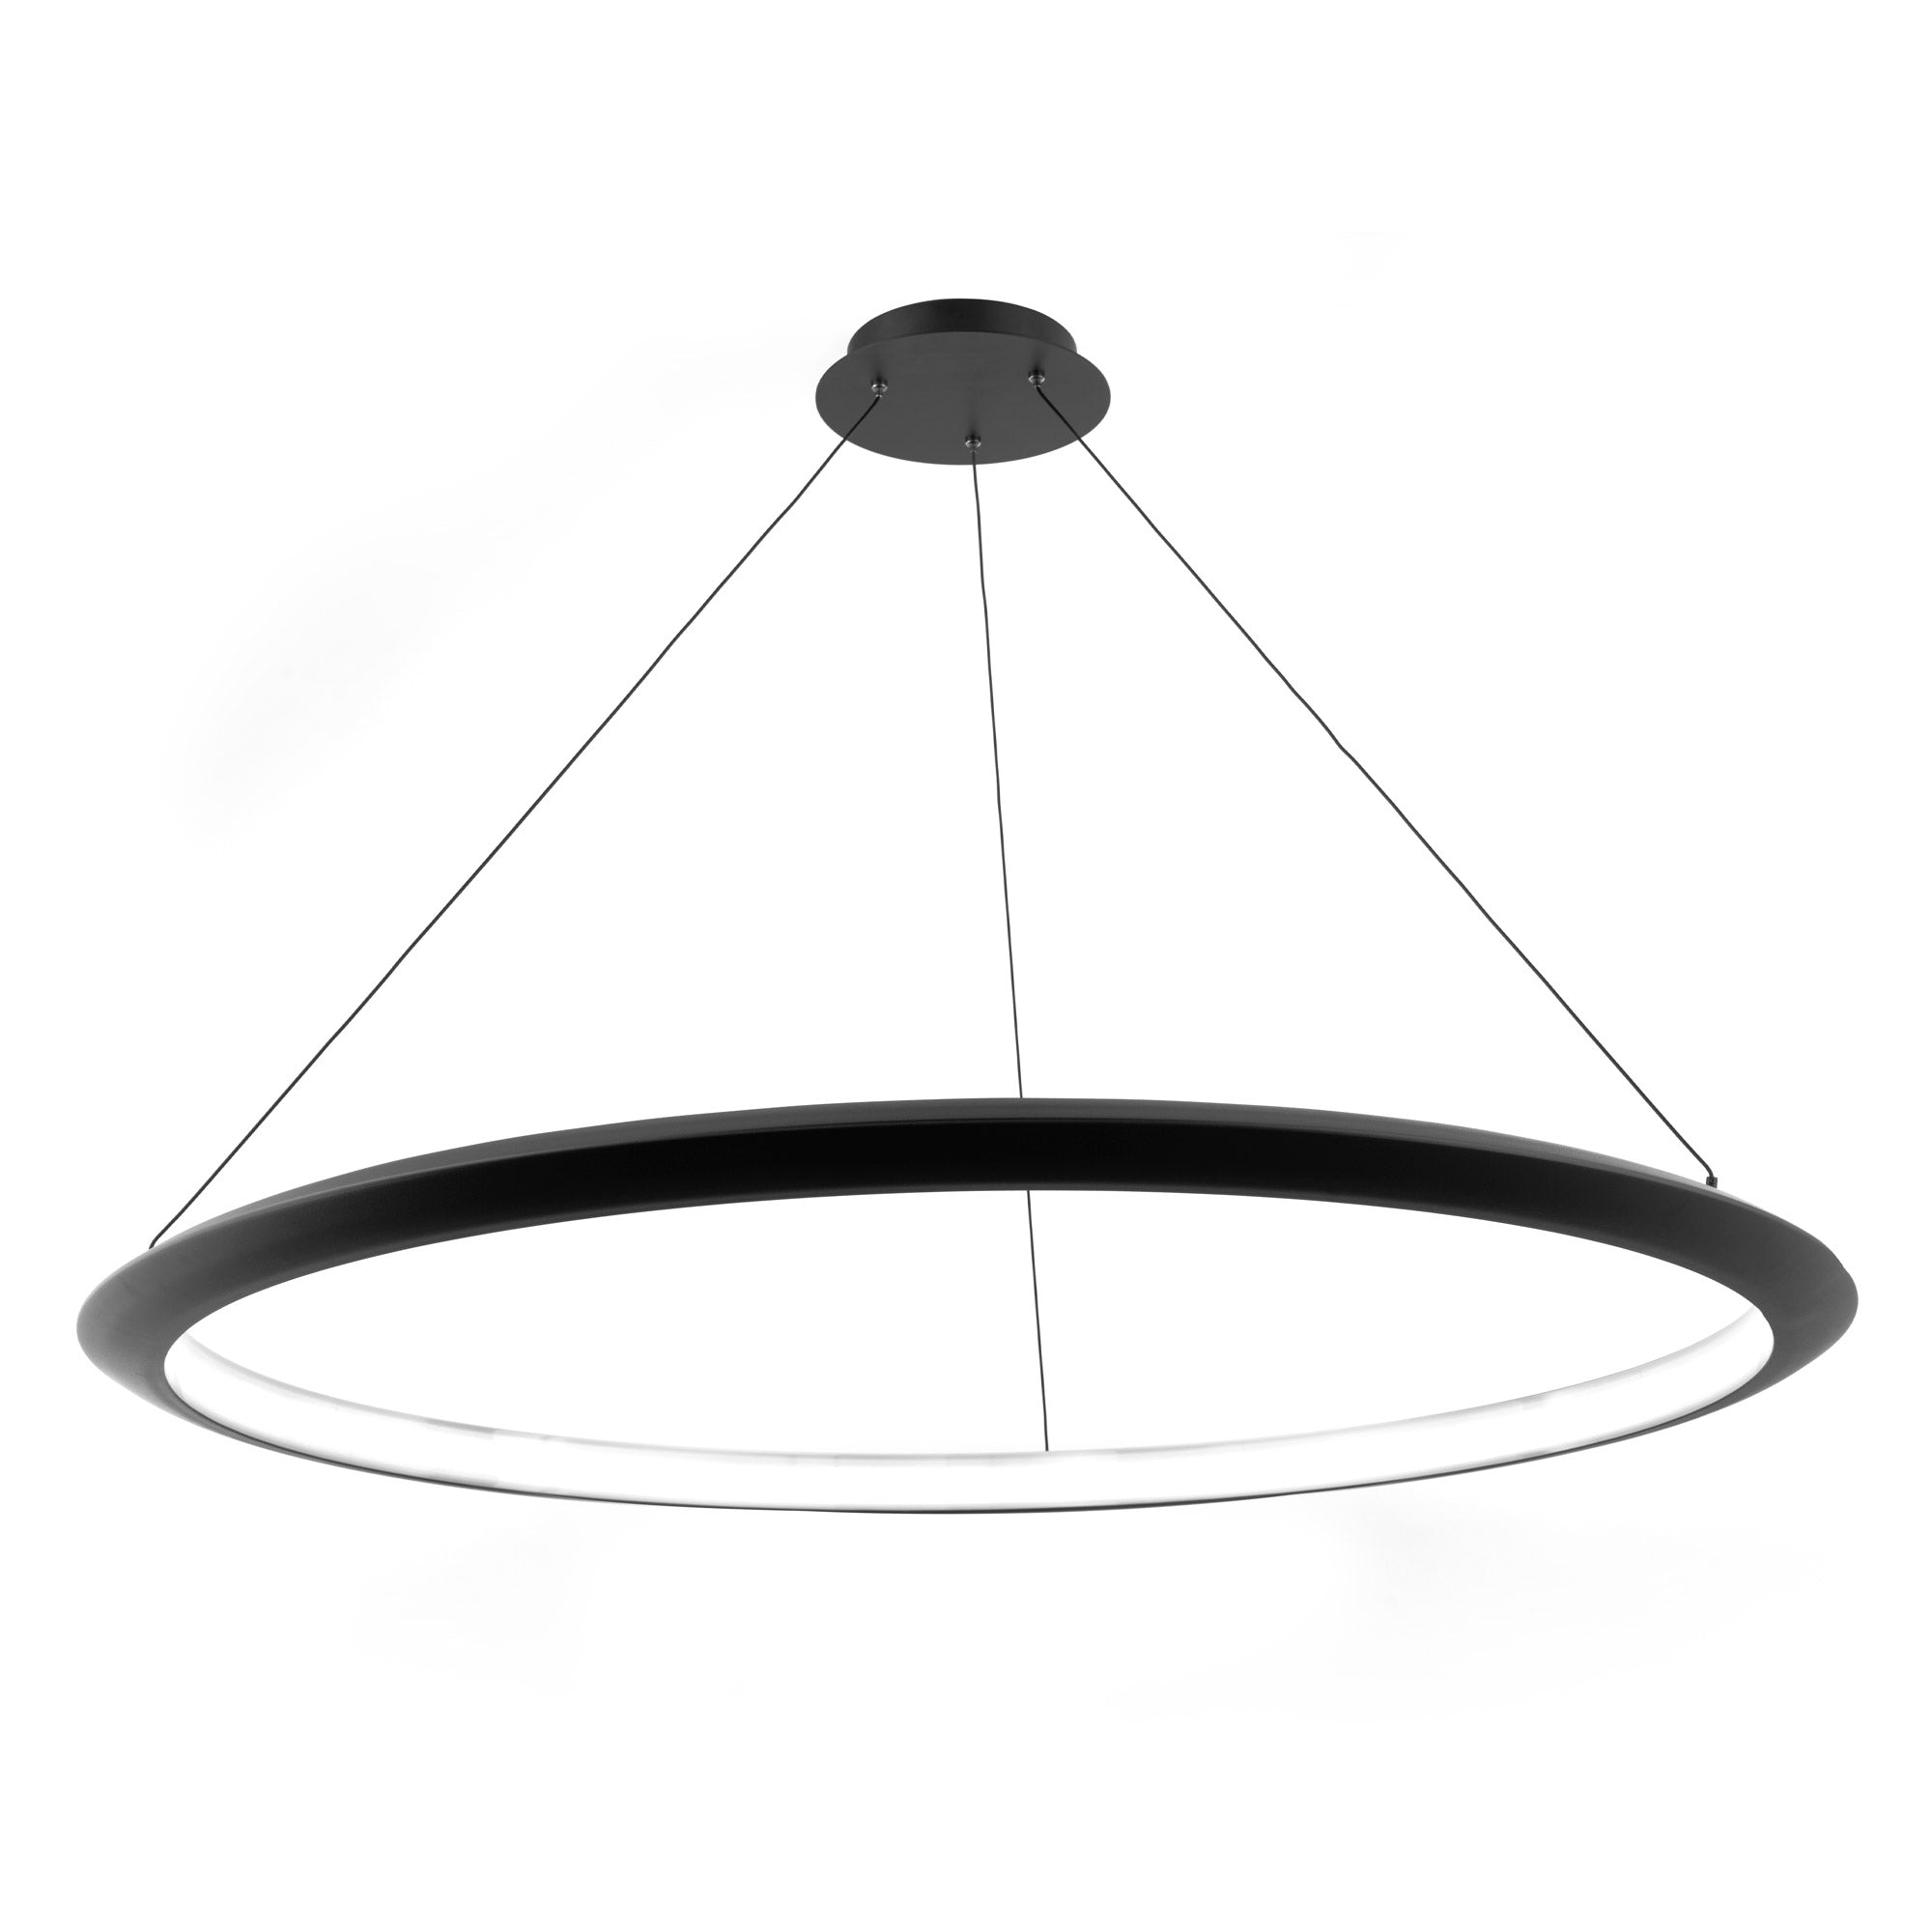 THE RING Chandelier Black INTEGRATED LED - PD-55048-35-BK | MODERN FORMS